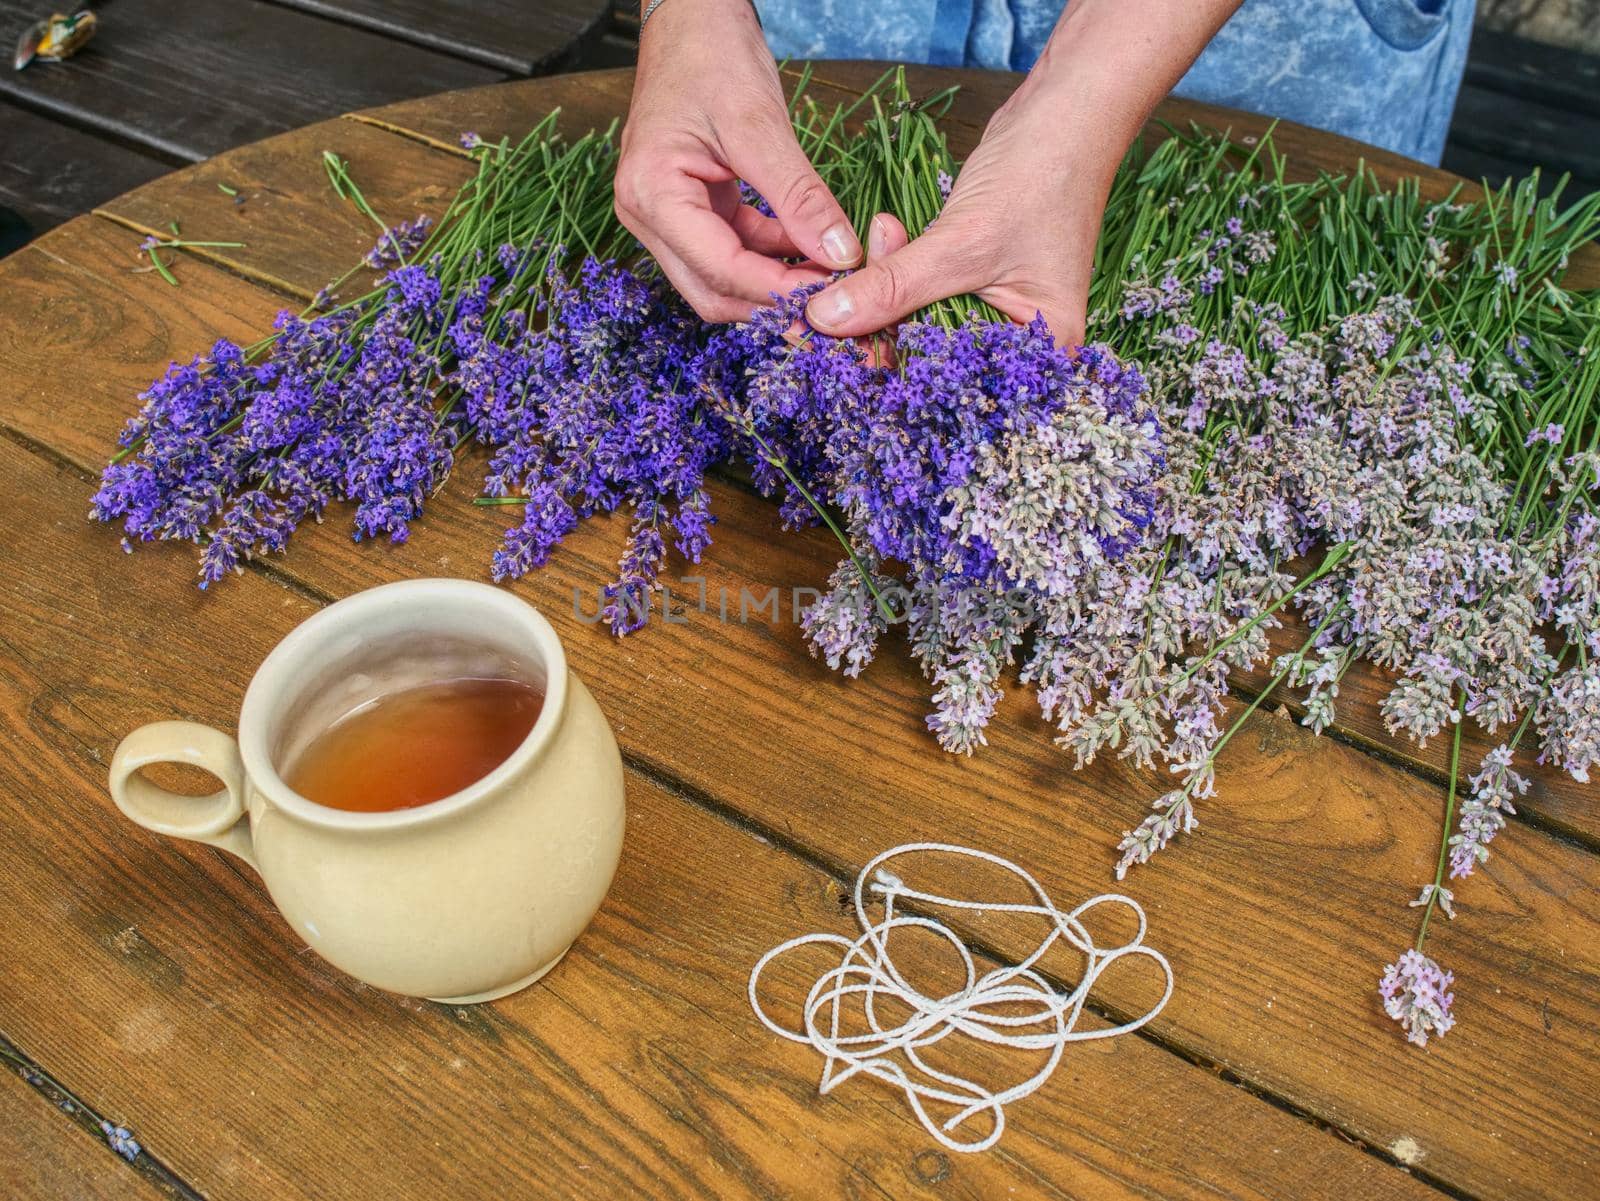 Hands of gardener woman create relaxing smell herbal bouquet. Working table with herbal tea, stalks of lavender and scissors.